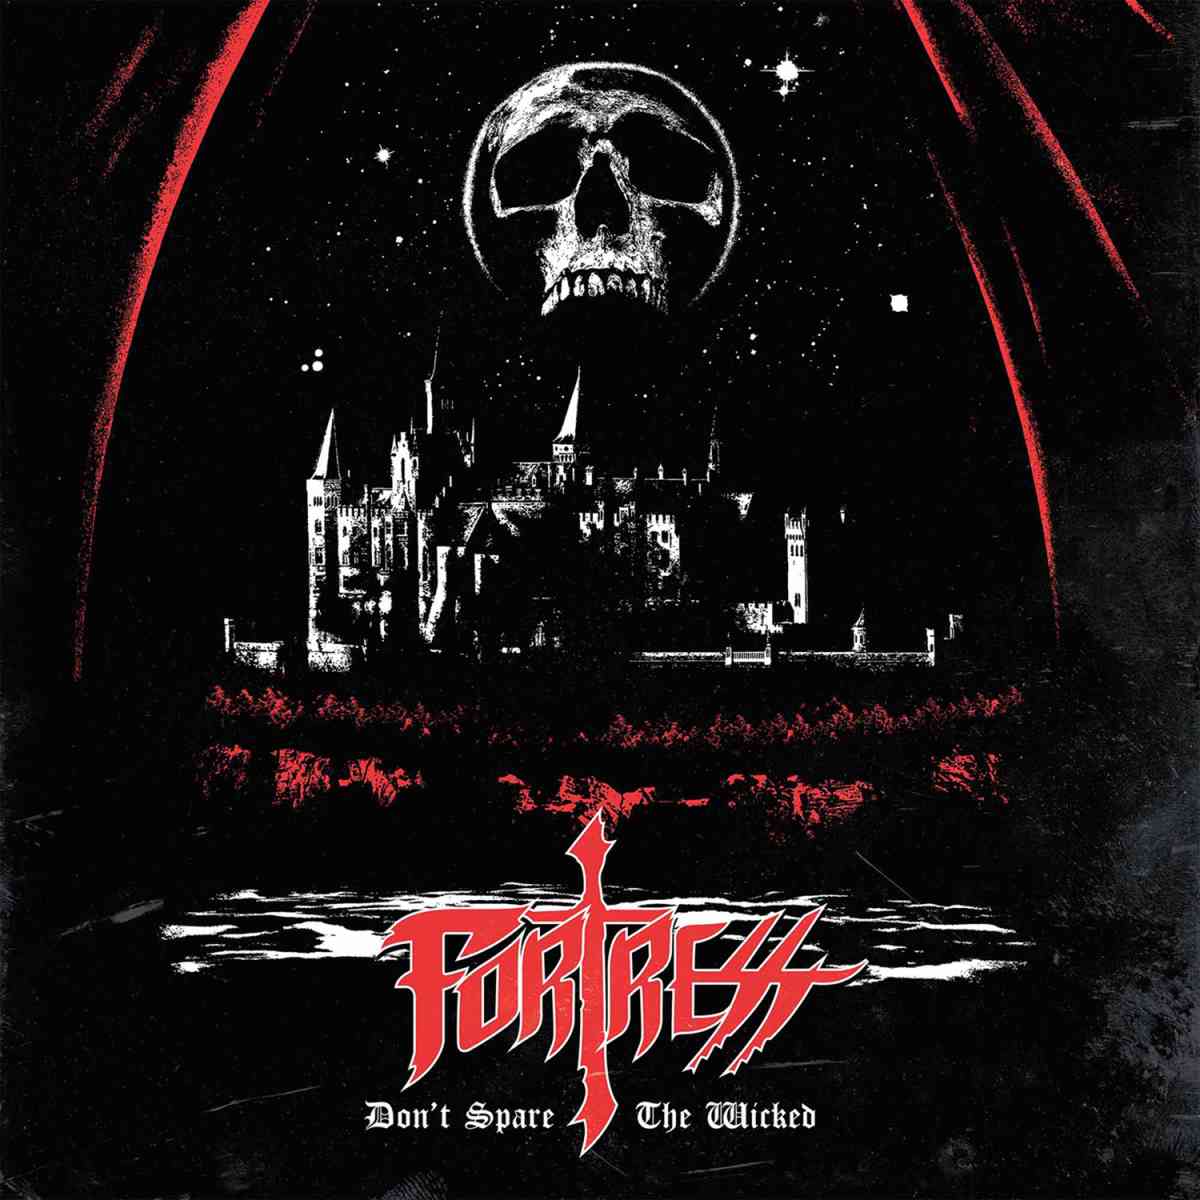 FORTRESS - dont spare the wicked - album cover